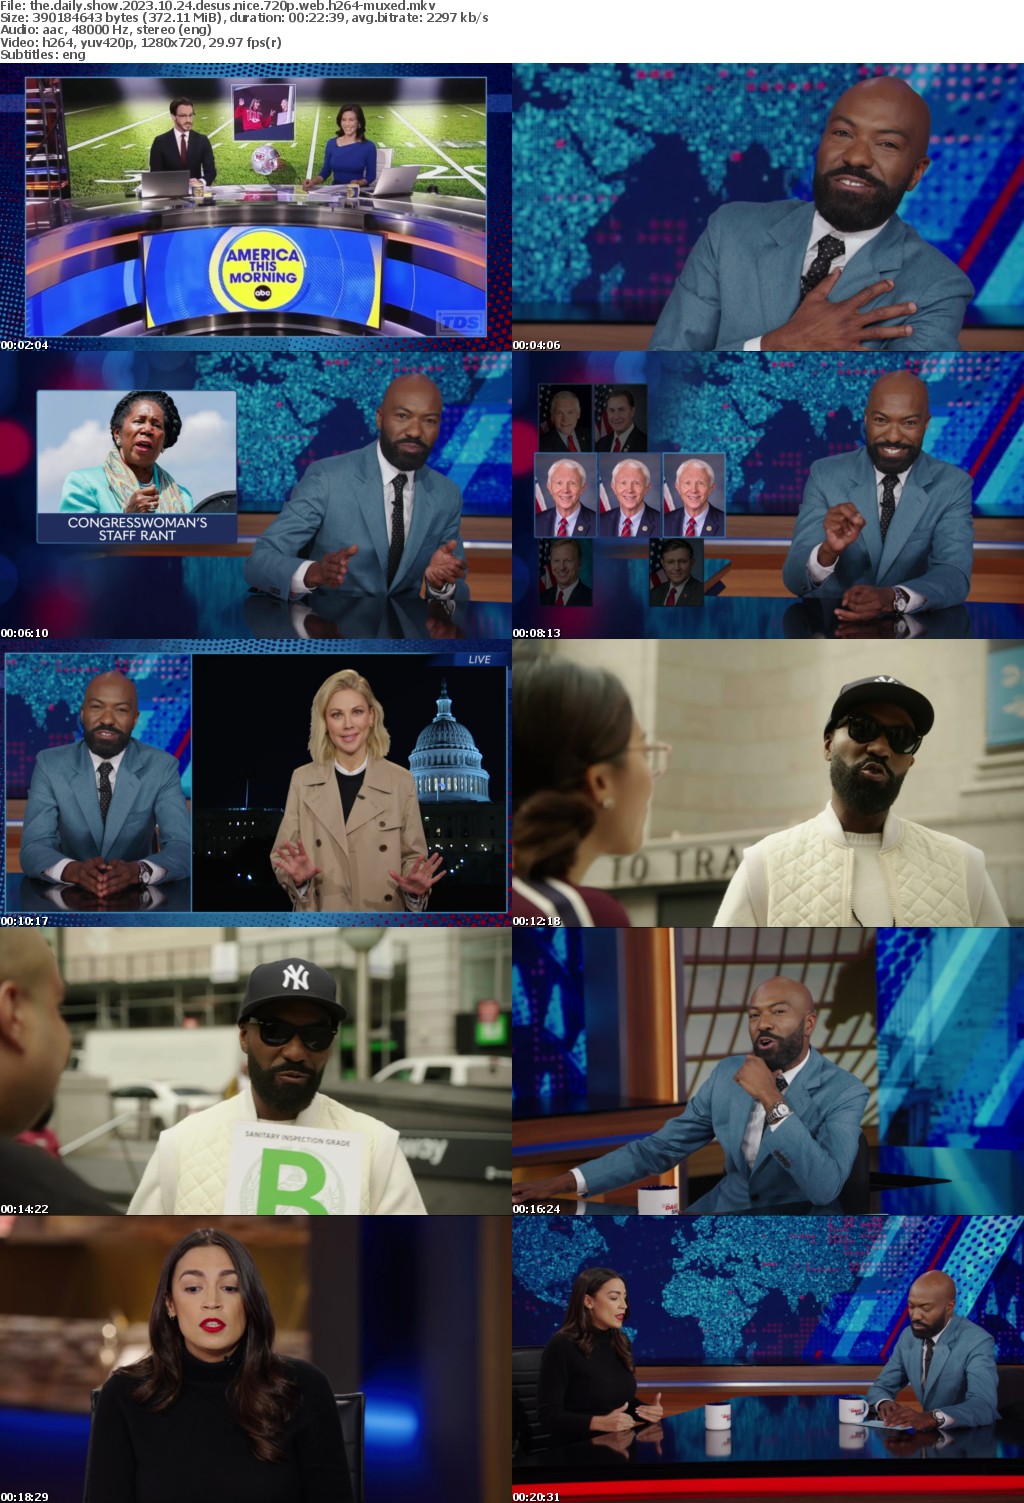 The Daily Show 2023 10 24 Desus Nice 720p WEB H264-MUXED